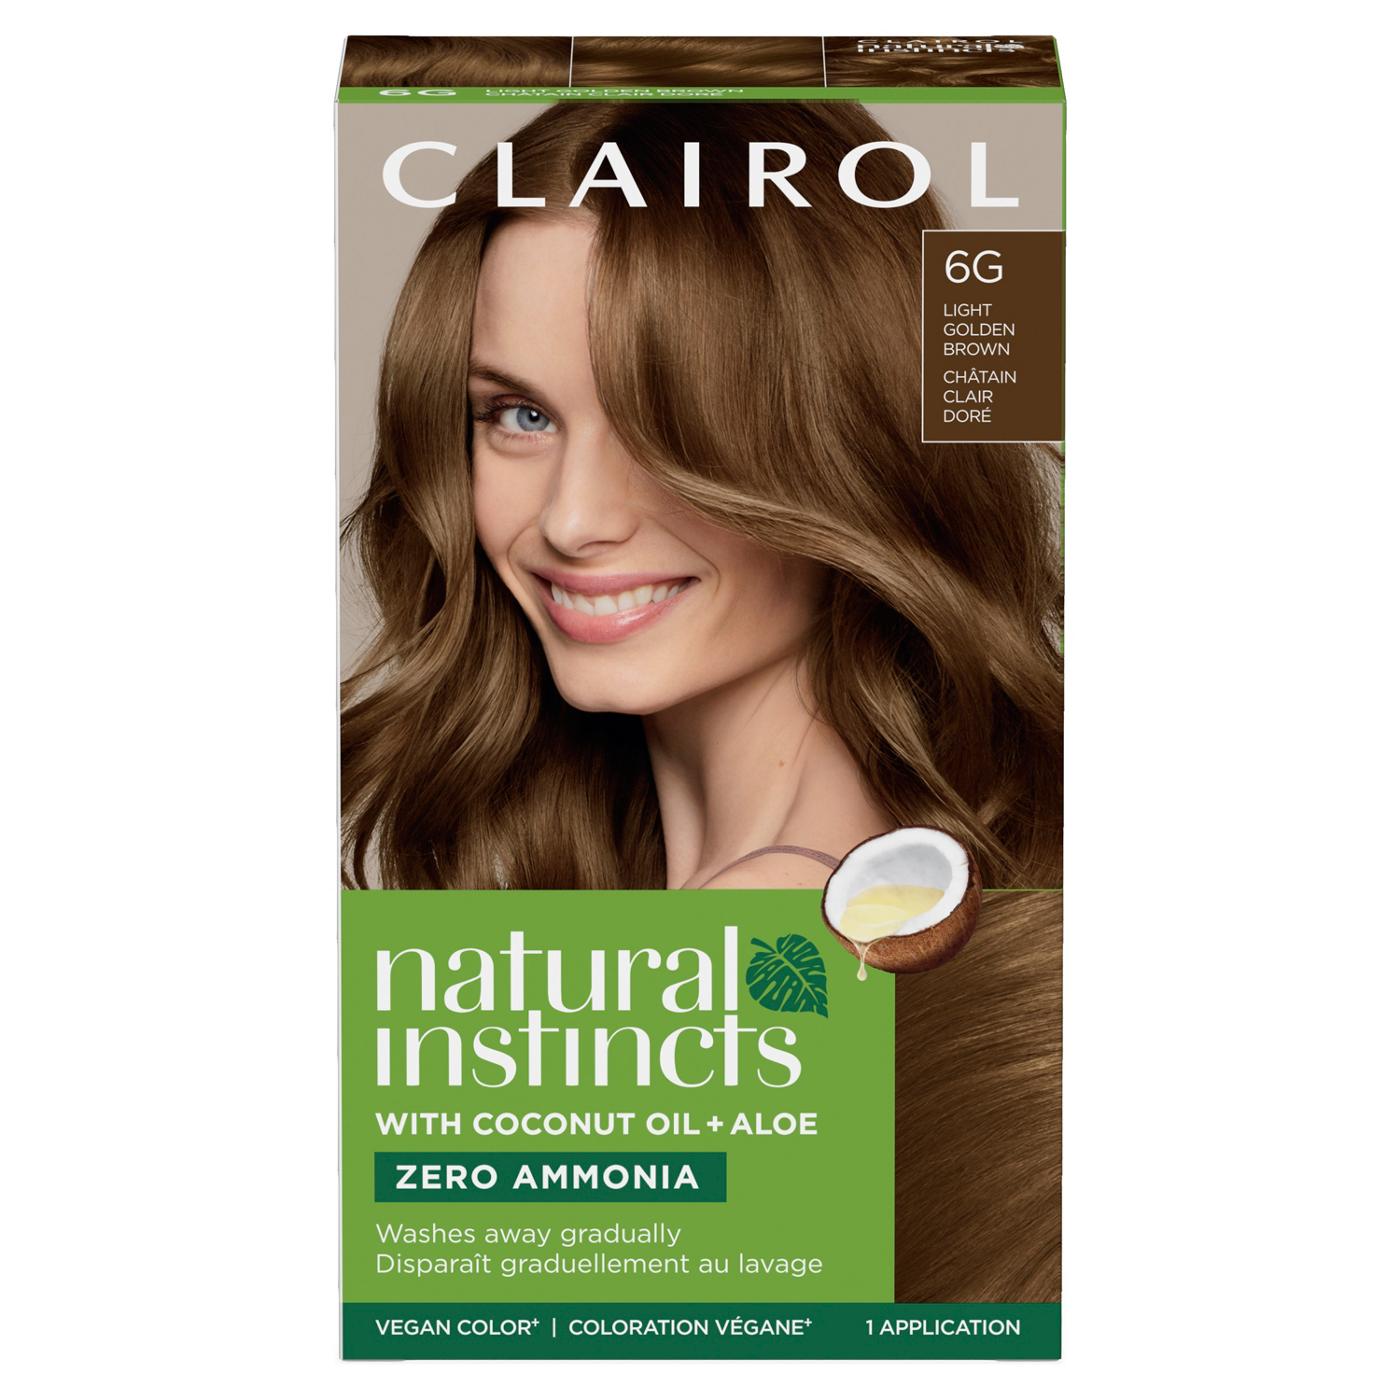 Clairol Natural Insticts Vegan Demi-Permanent Hair Color - 6G Light Golden Brown; image 2 of 11